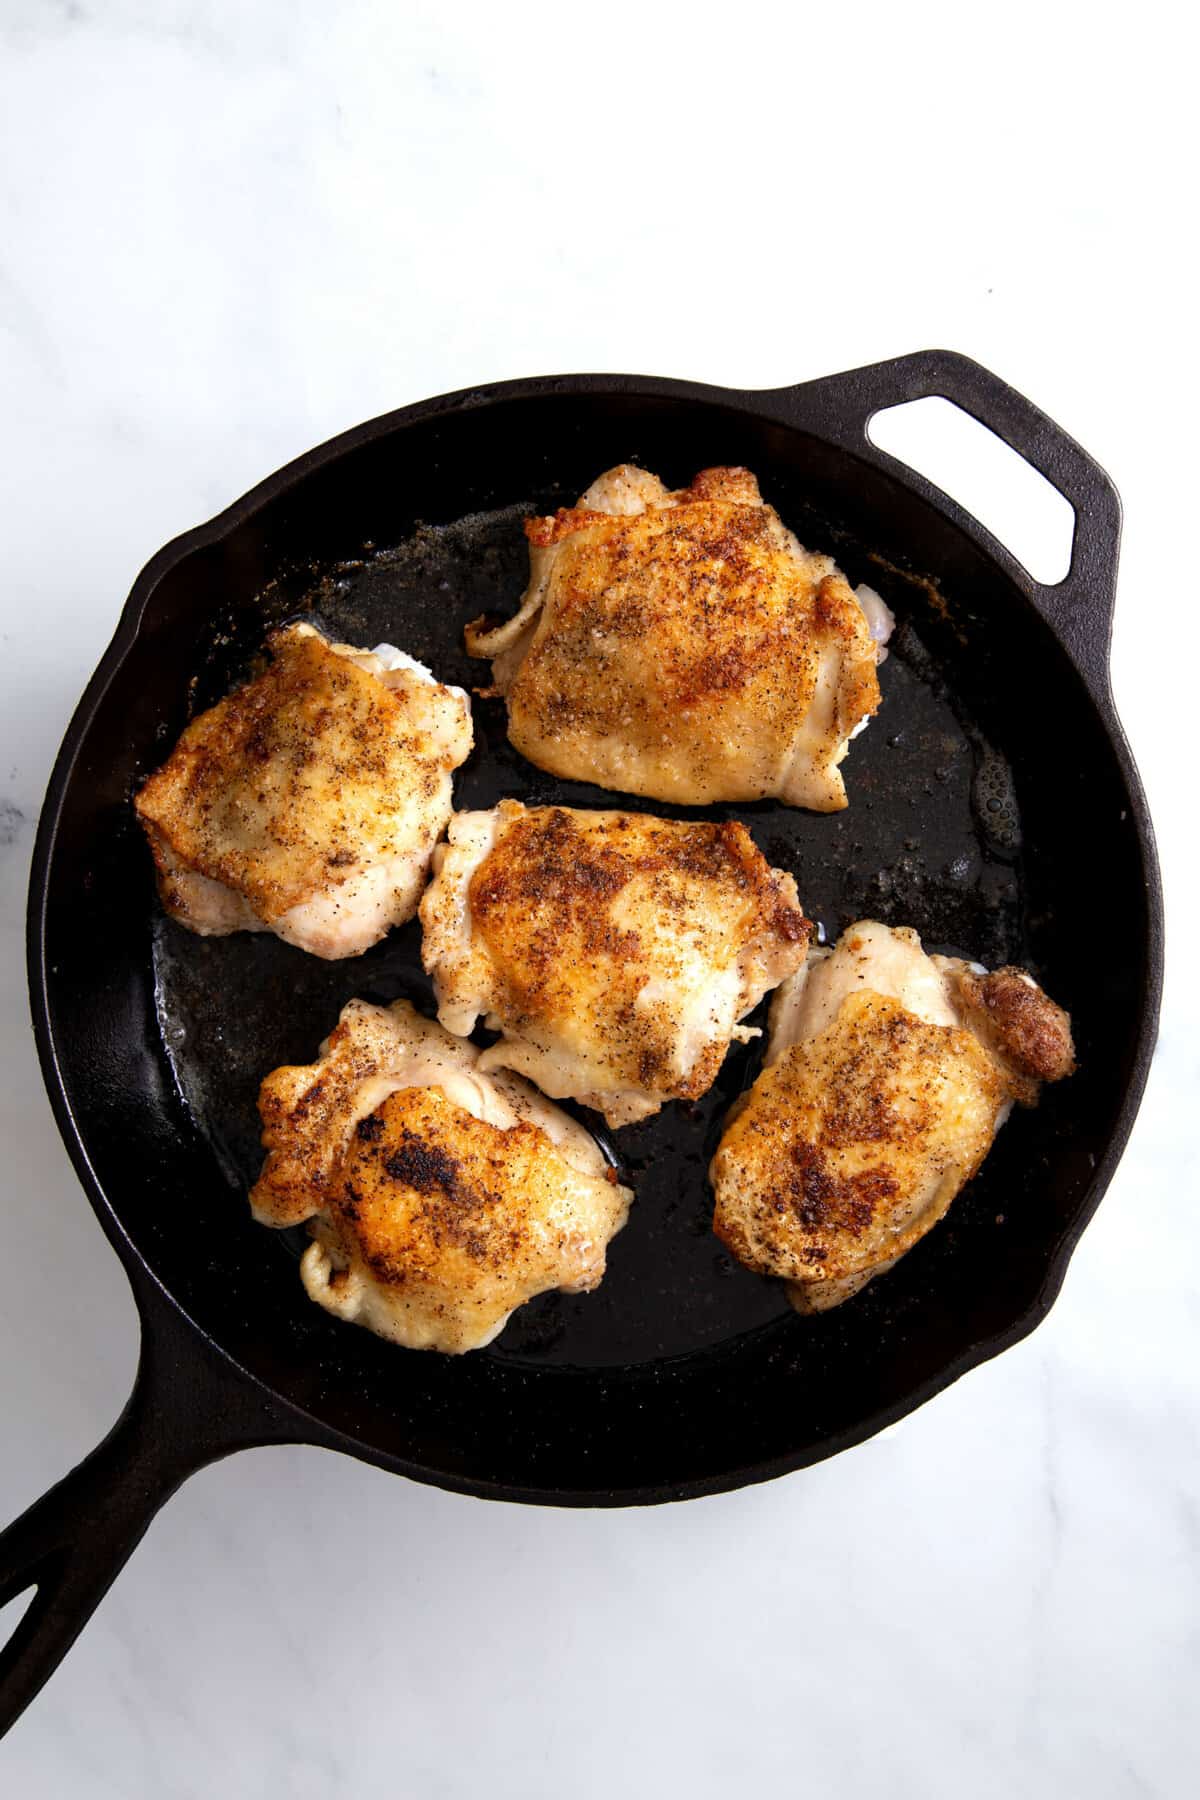 step 2 to make cast iron chicken thighs, cook chicken thighs on a hot cast iron skillet pan